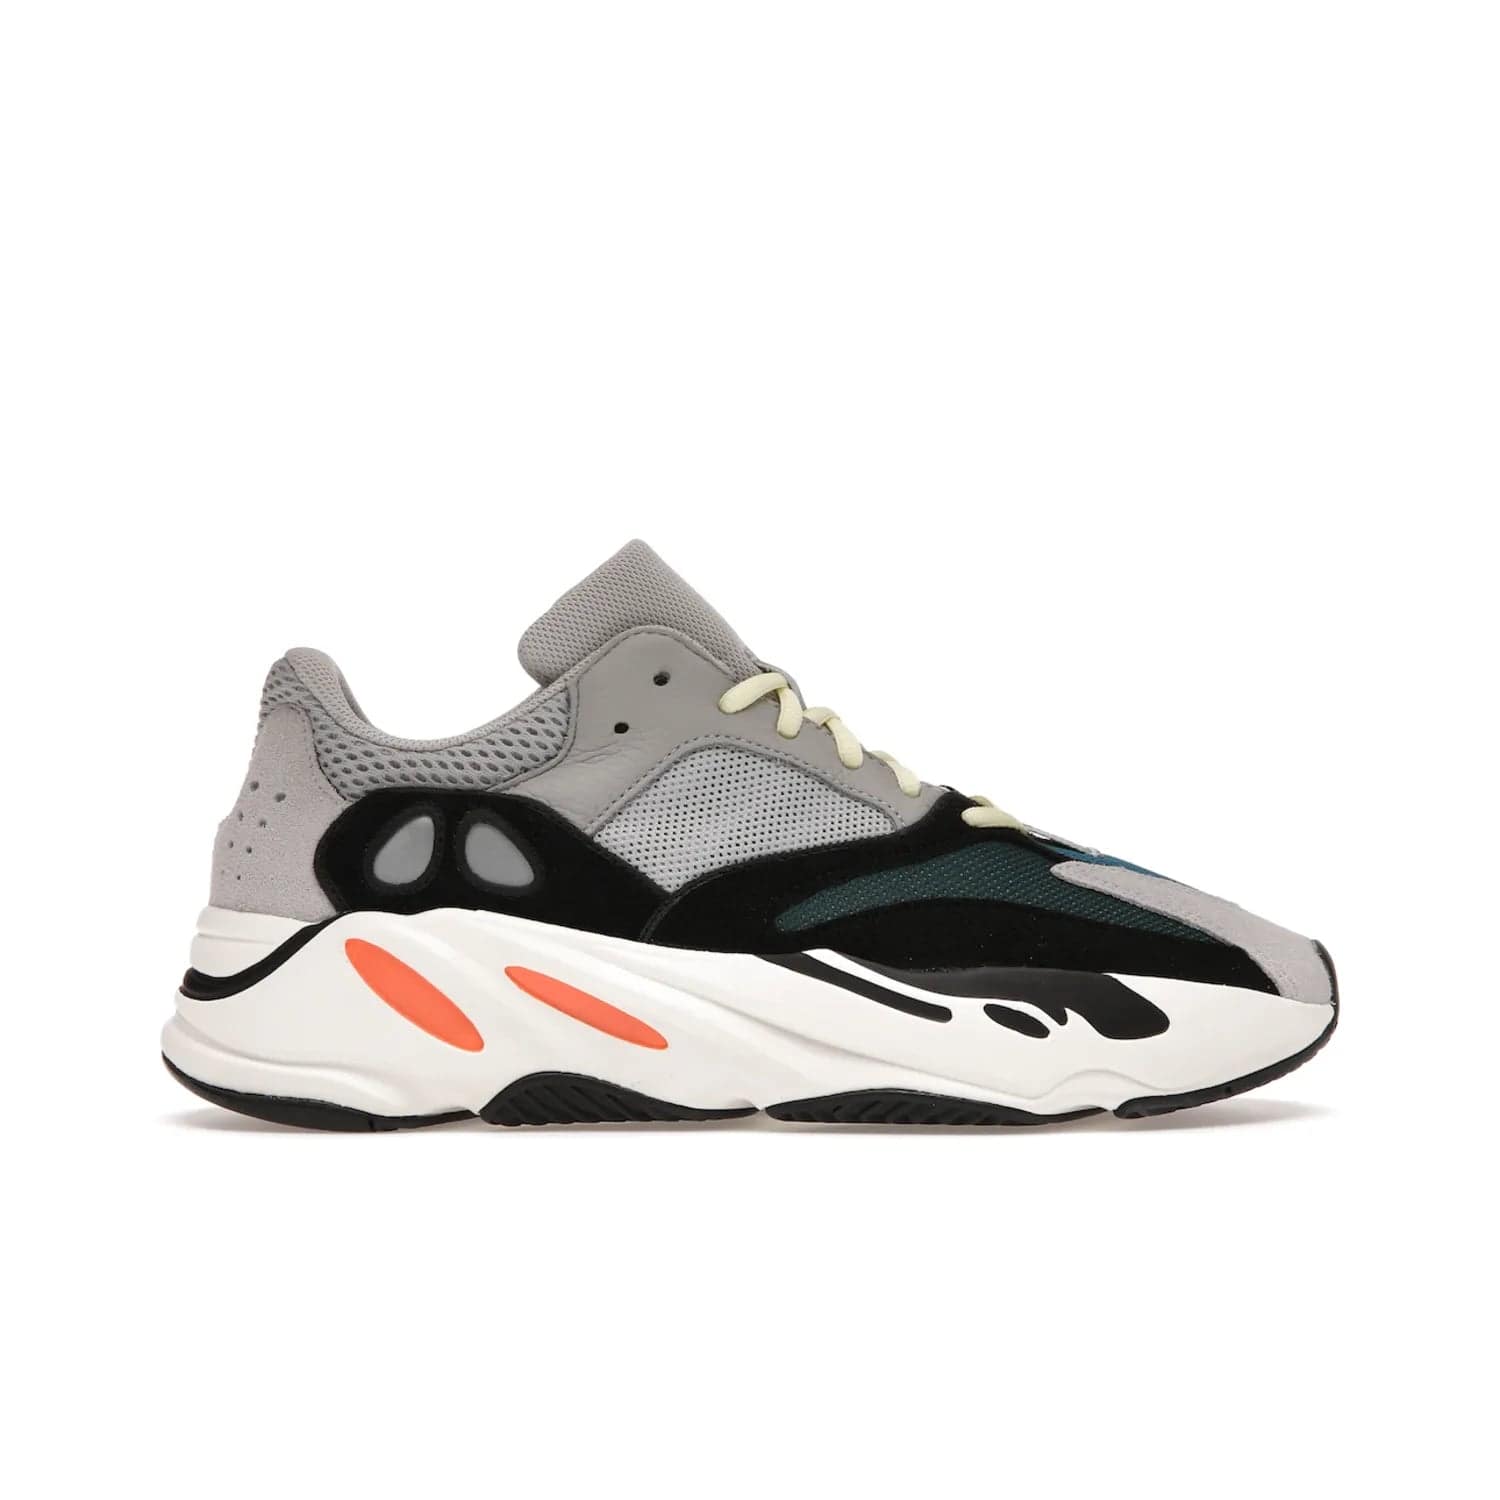 adidas Yeezy Boost 700 Wave Runner - Image 1 - Only at www.BallersClubKickz.com - Shop the iconic adidas Yeezy Boost 700 Wave Runner. Featuring grey mesh and leather upper, black suede overlays, teal mesh underlays, and signature Boost sole. Be bold & make a statement.